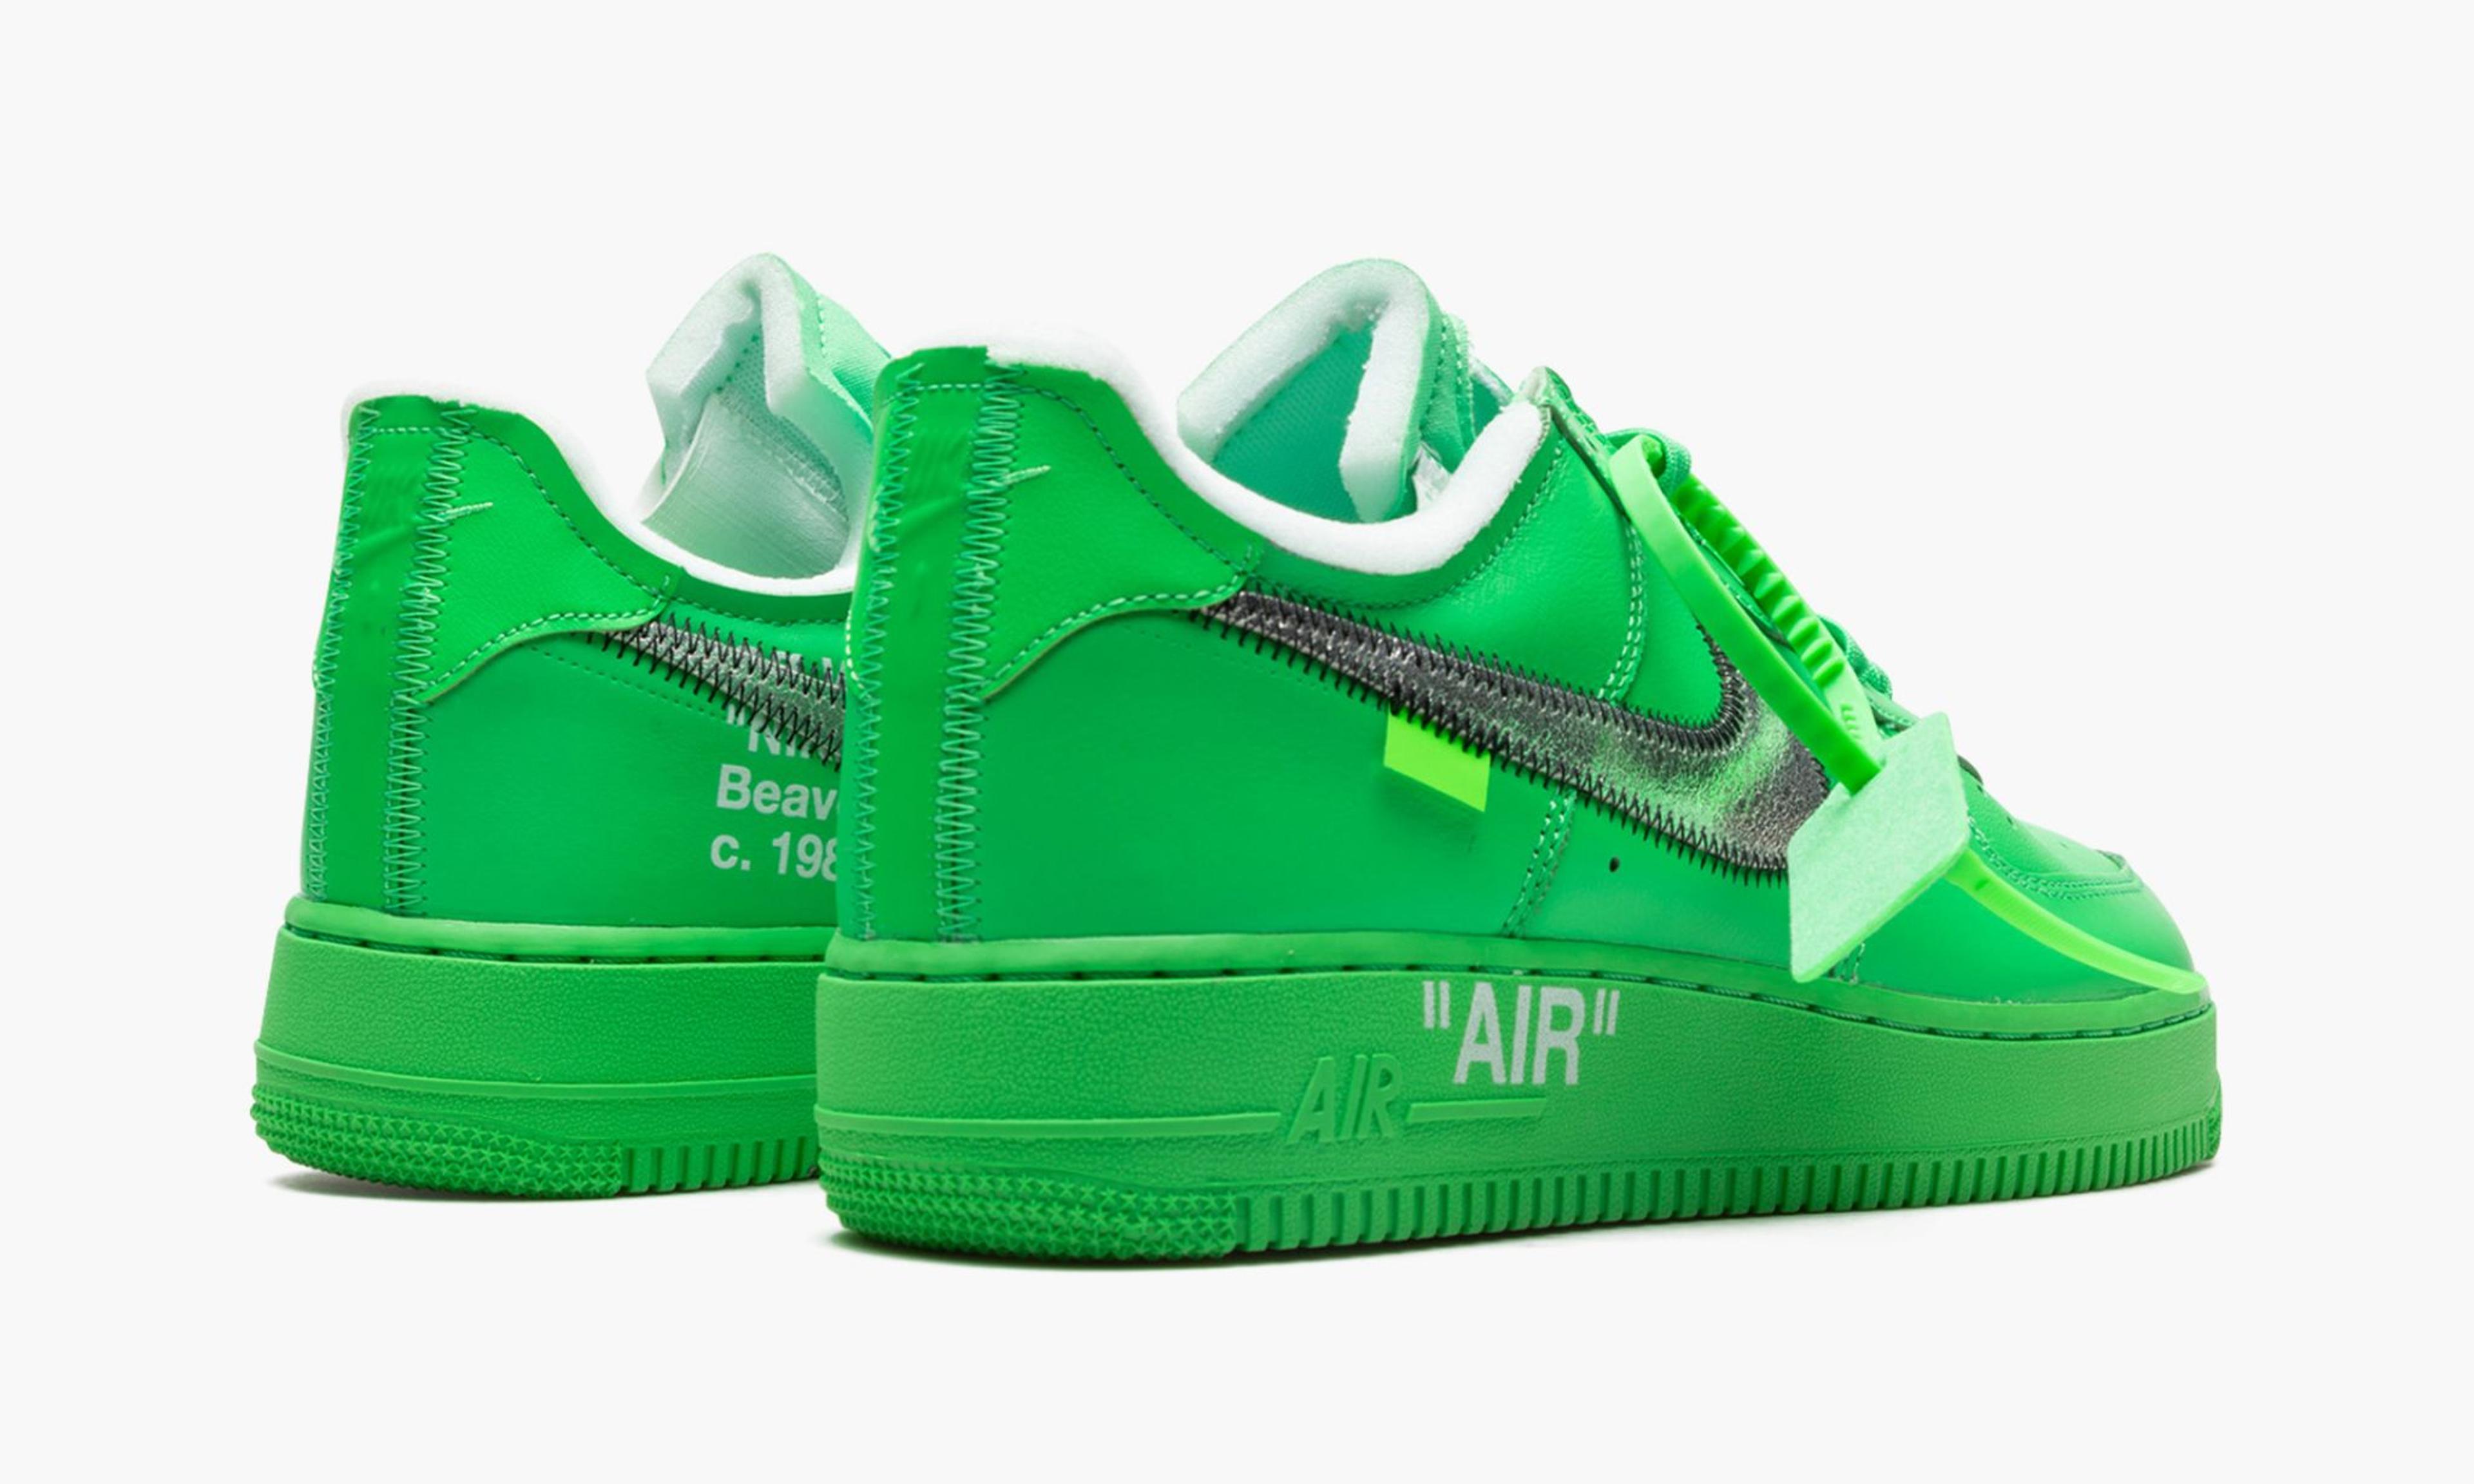 Nike Off-White x Air Force 1 Low 'Brooklyn' DX1419-300 - Size 9.5